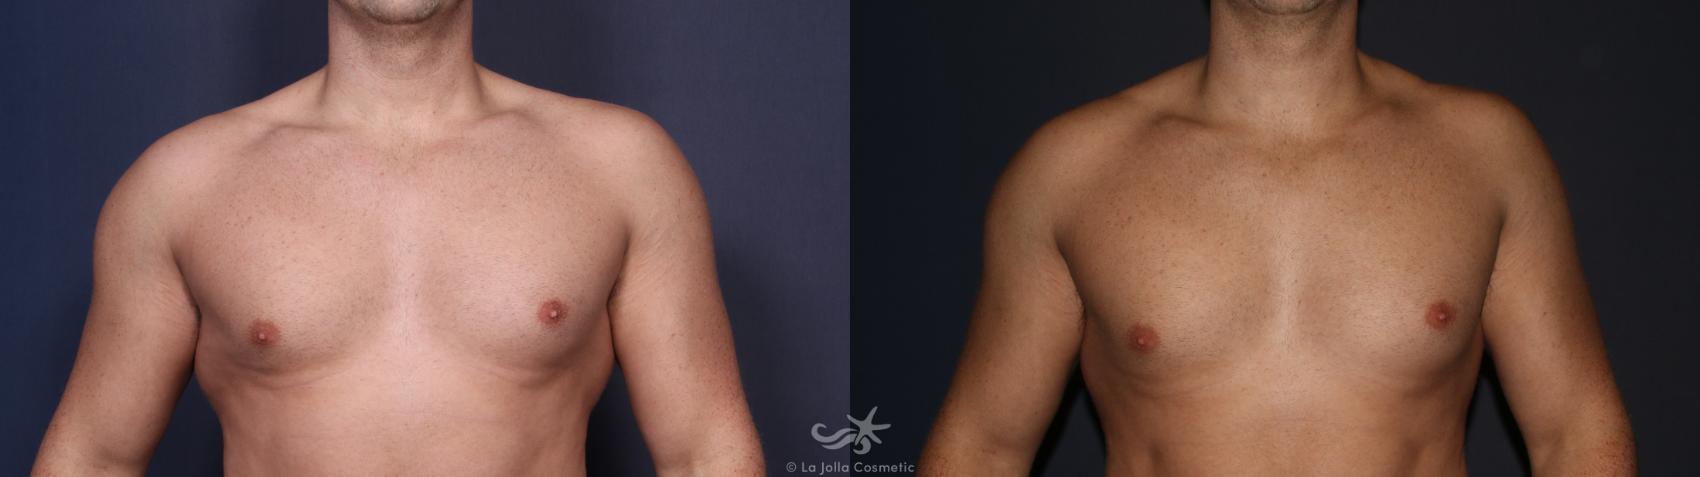 Before & After Male Liposuction Result 125 Front View in San Diego, CA